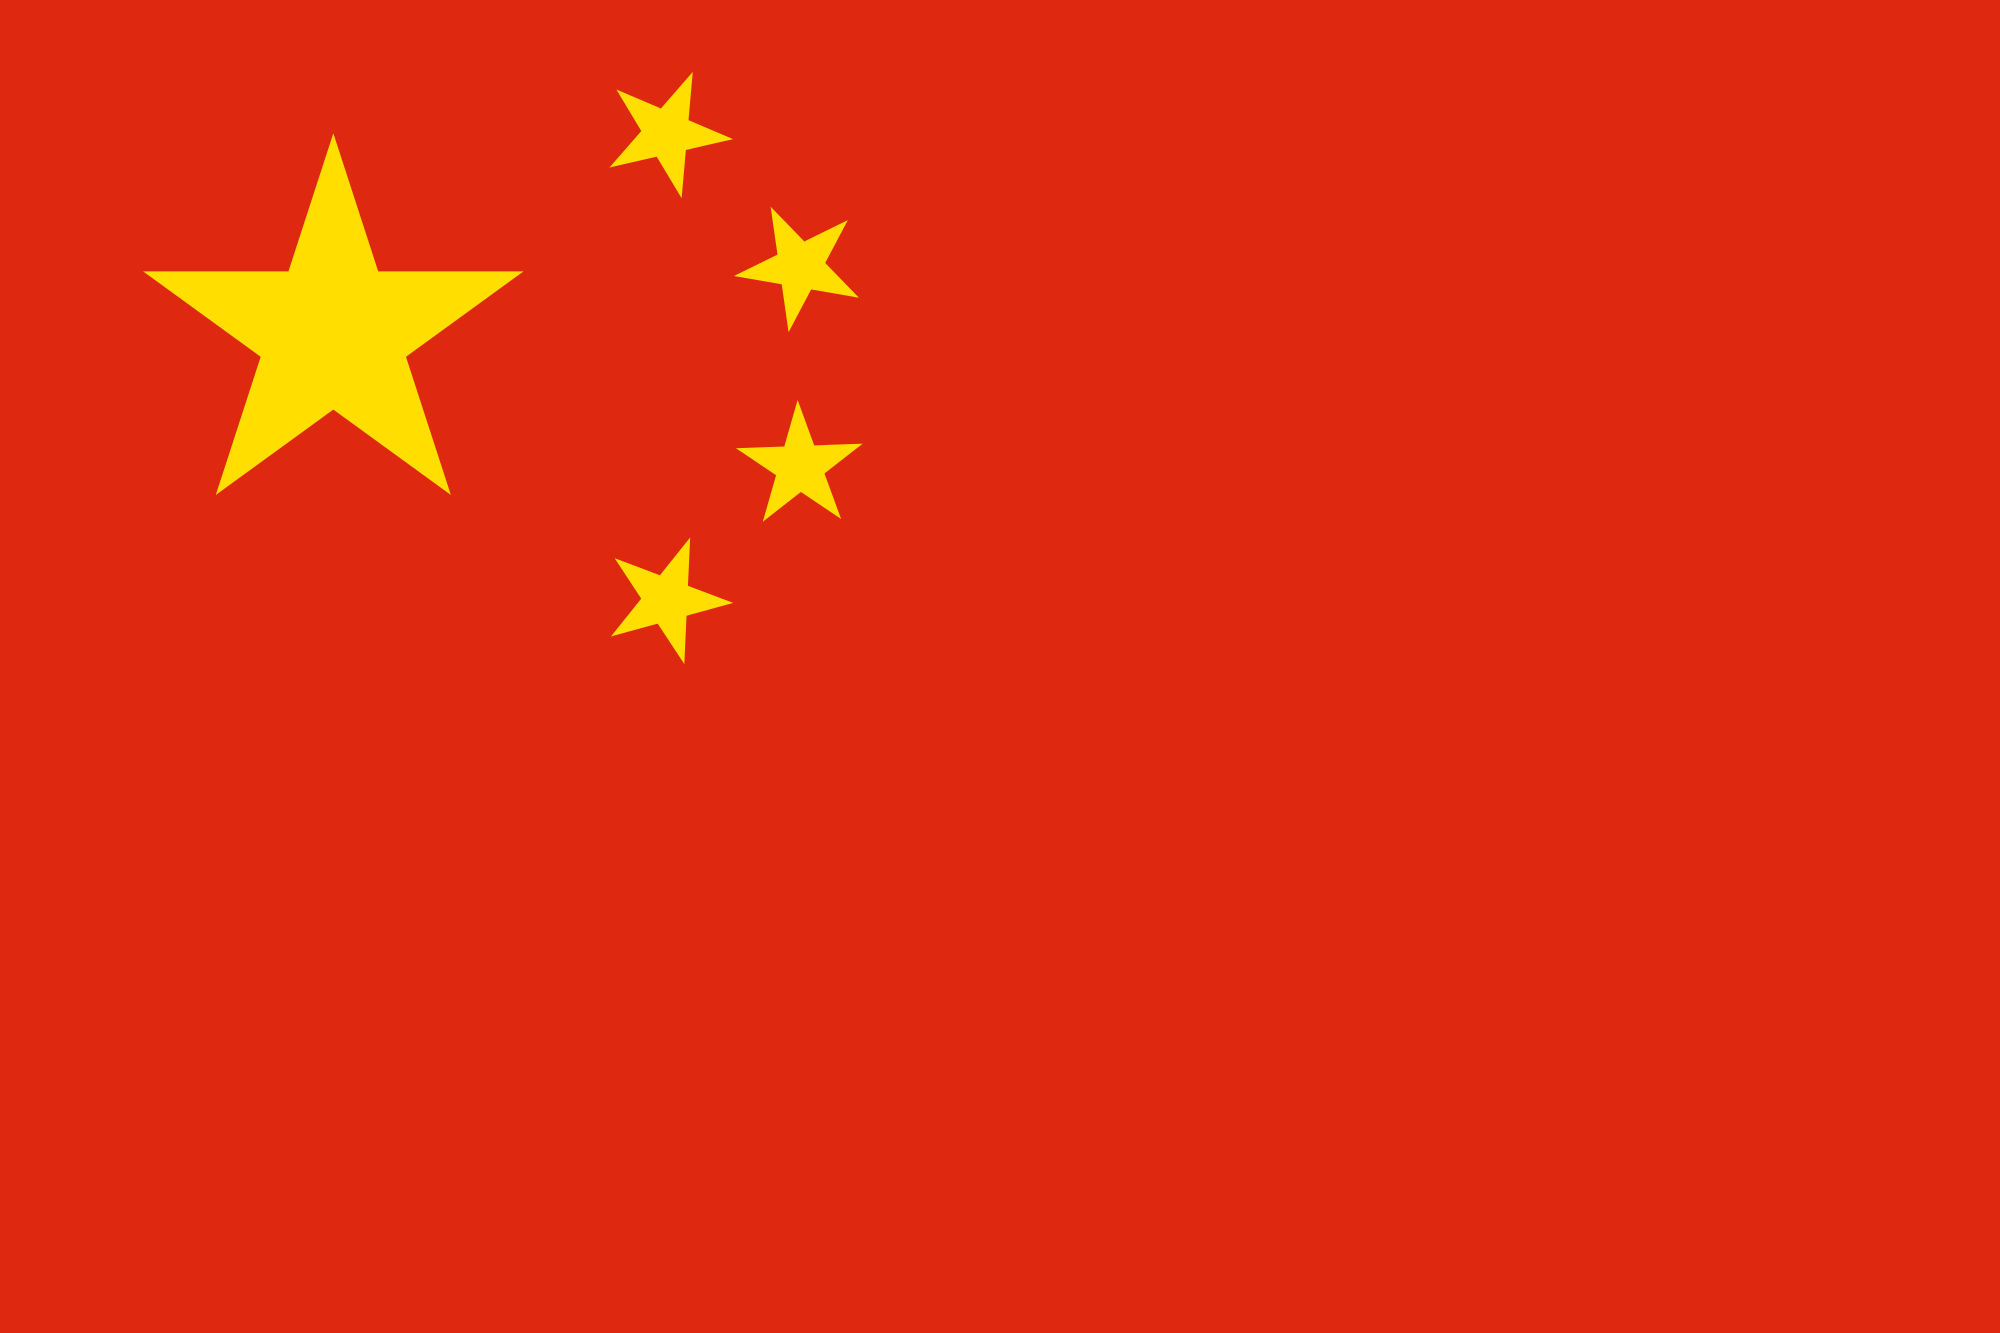 Yellow stars on red background makes up the Chinese flag